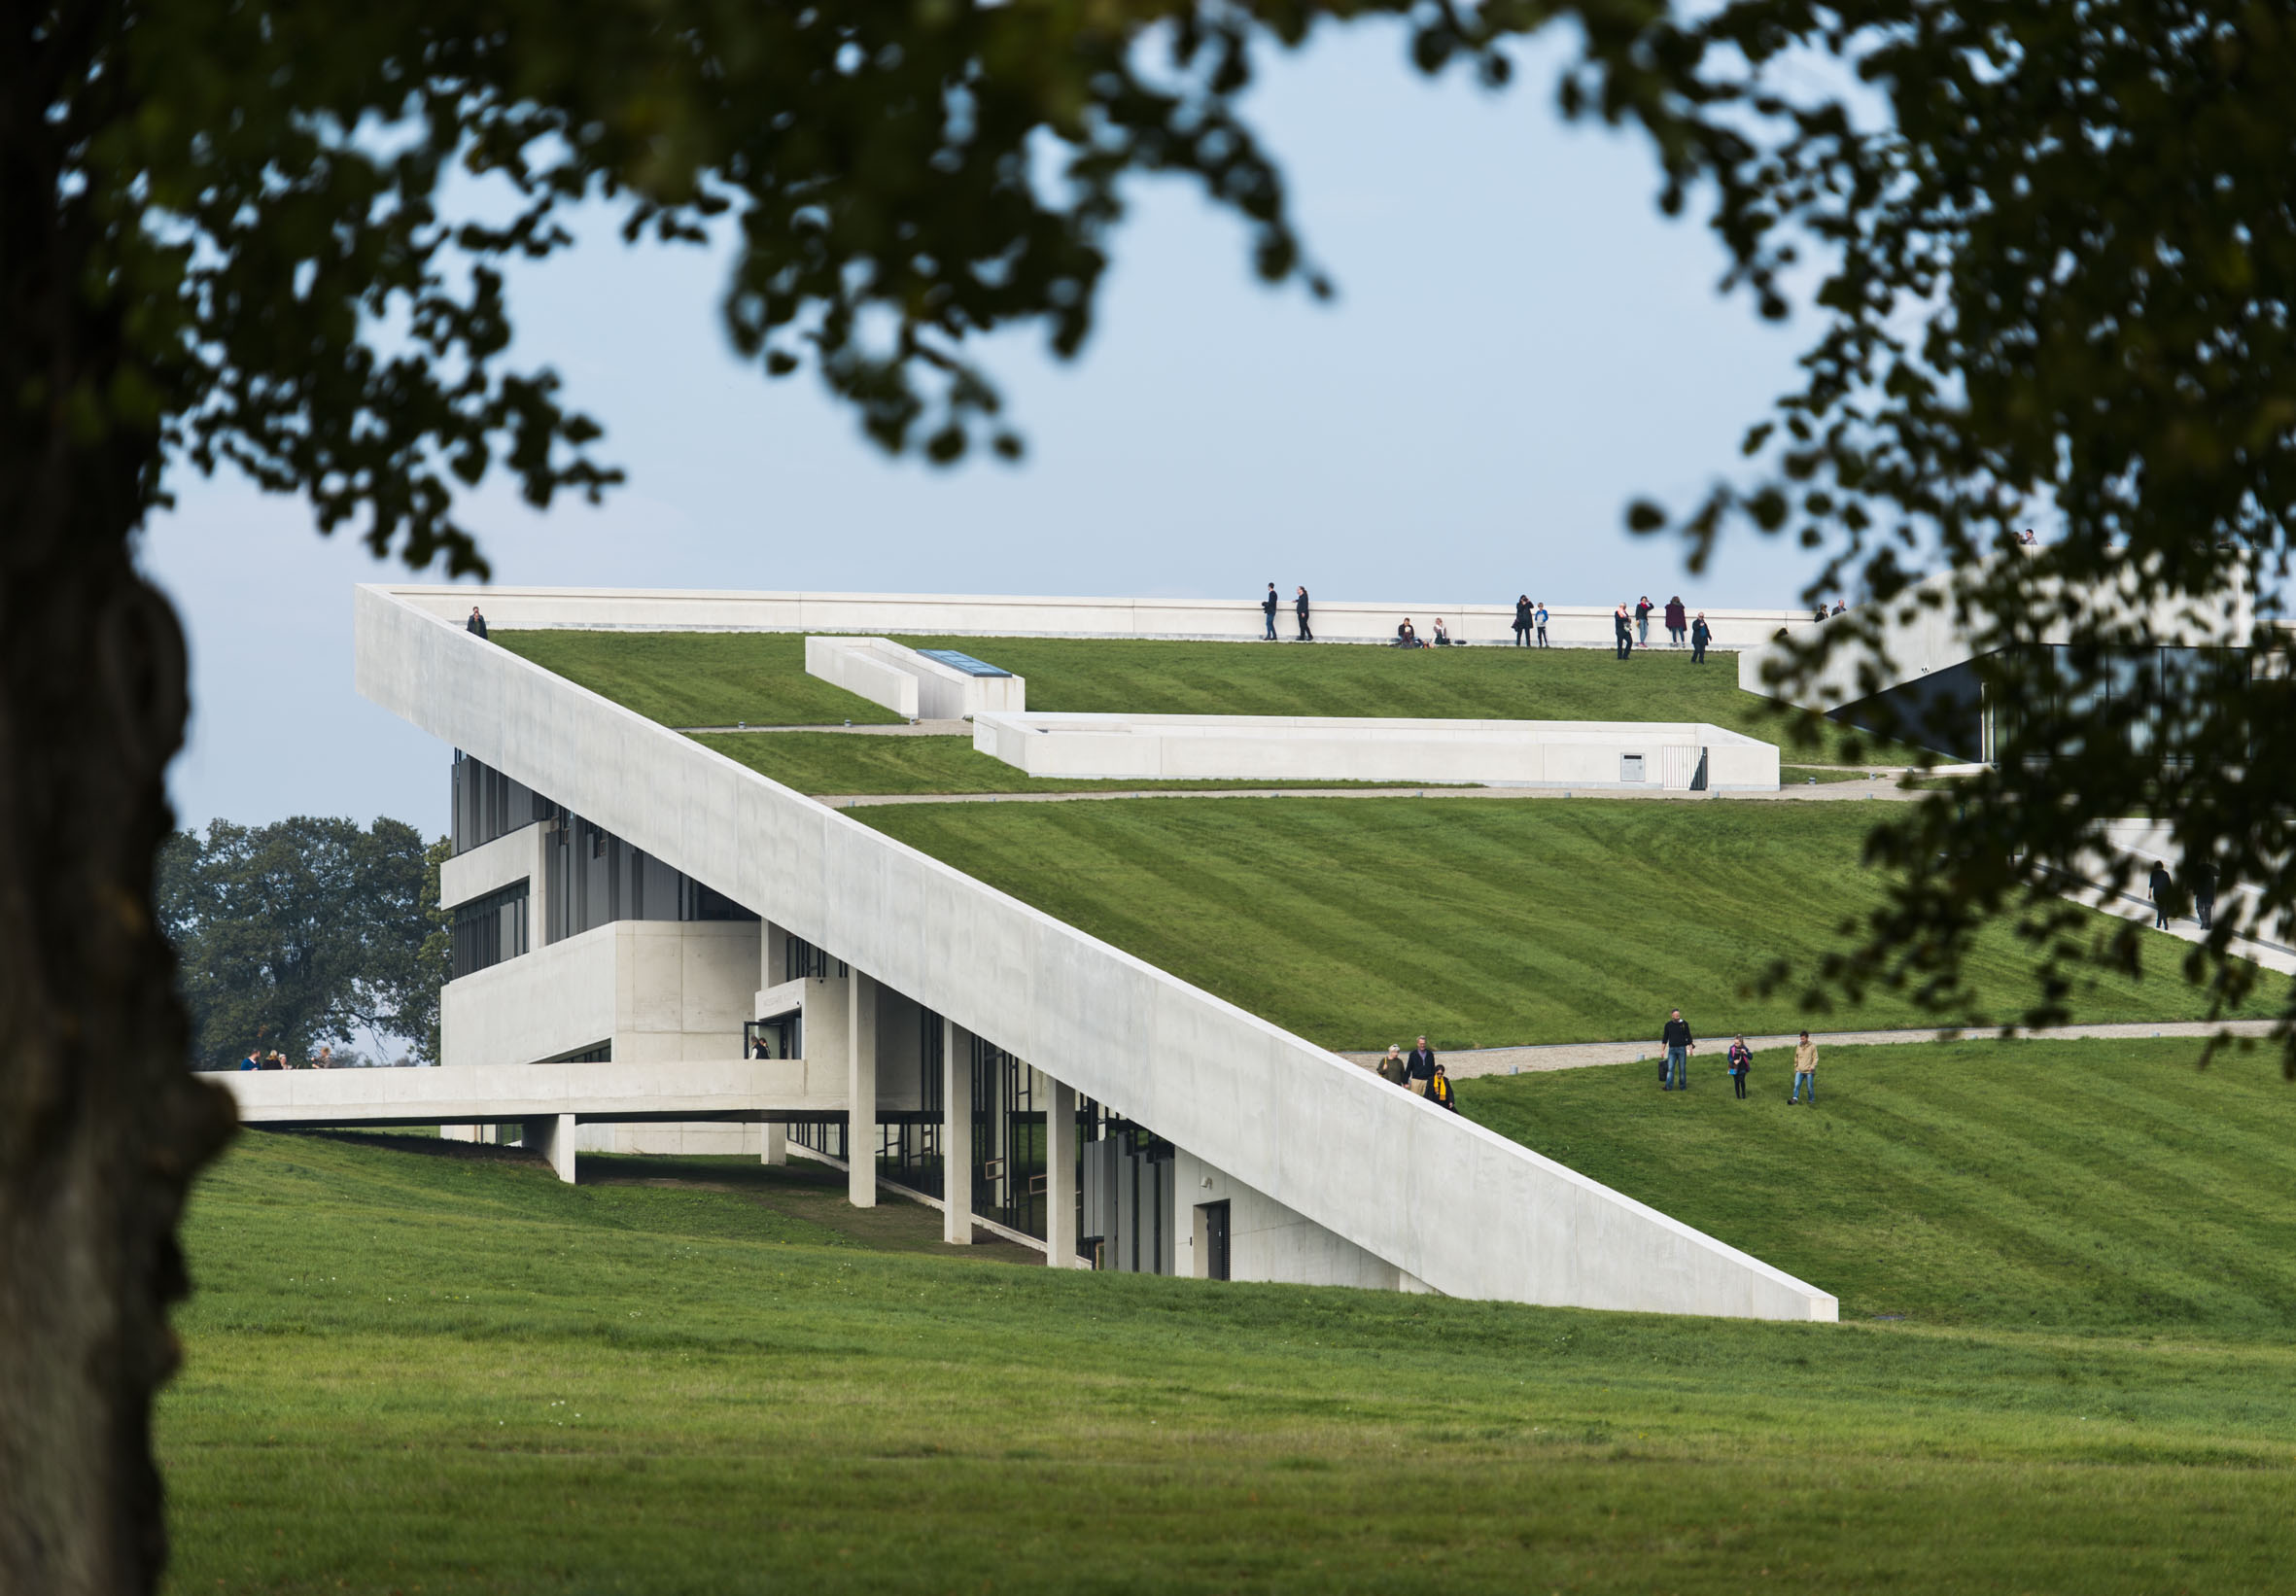 Photo of Moesgaard Museum by Henning Larsen Architects. Photo credit: Hufton Crow.